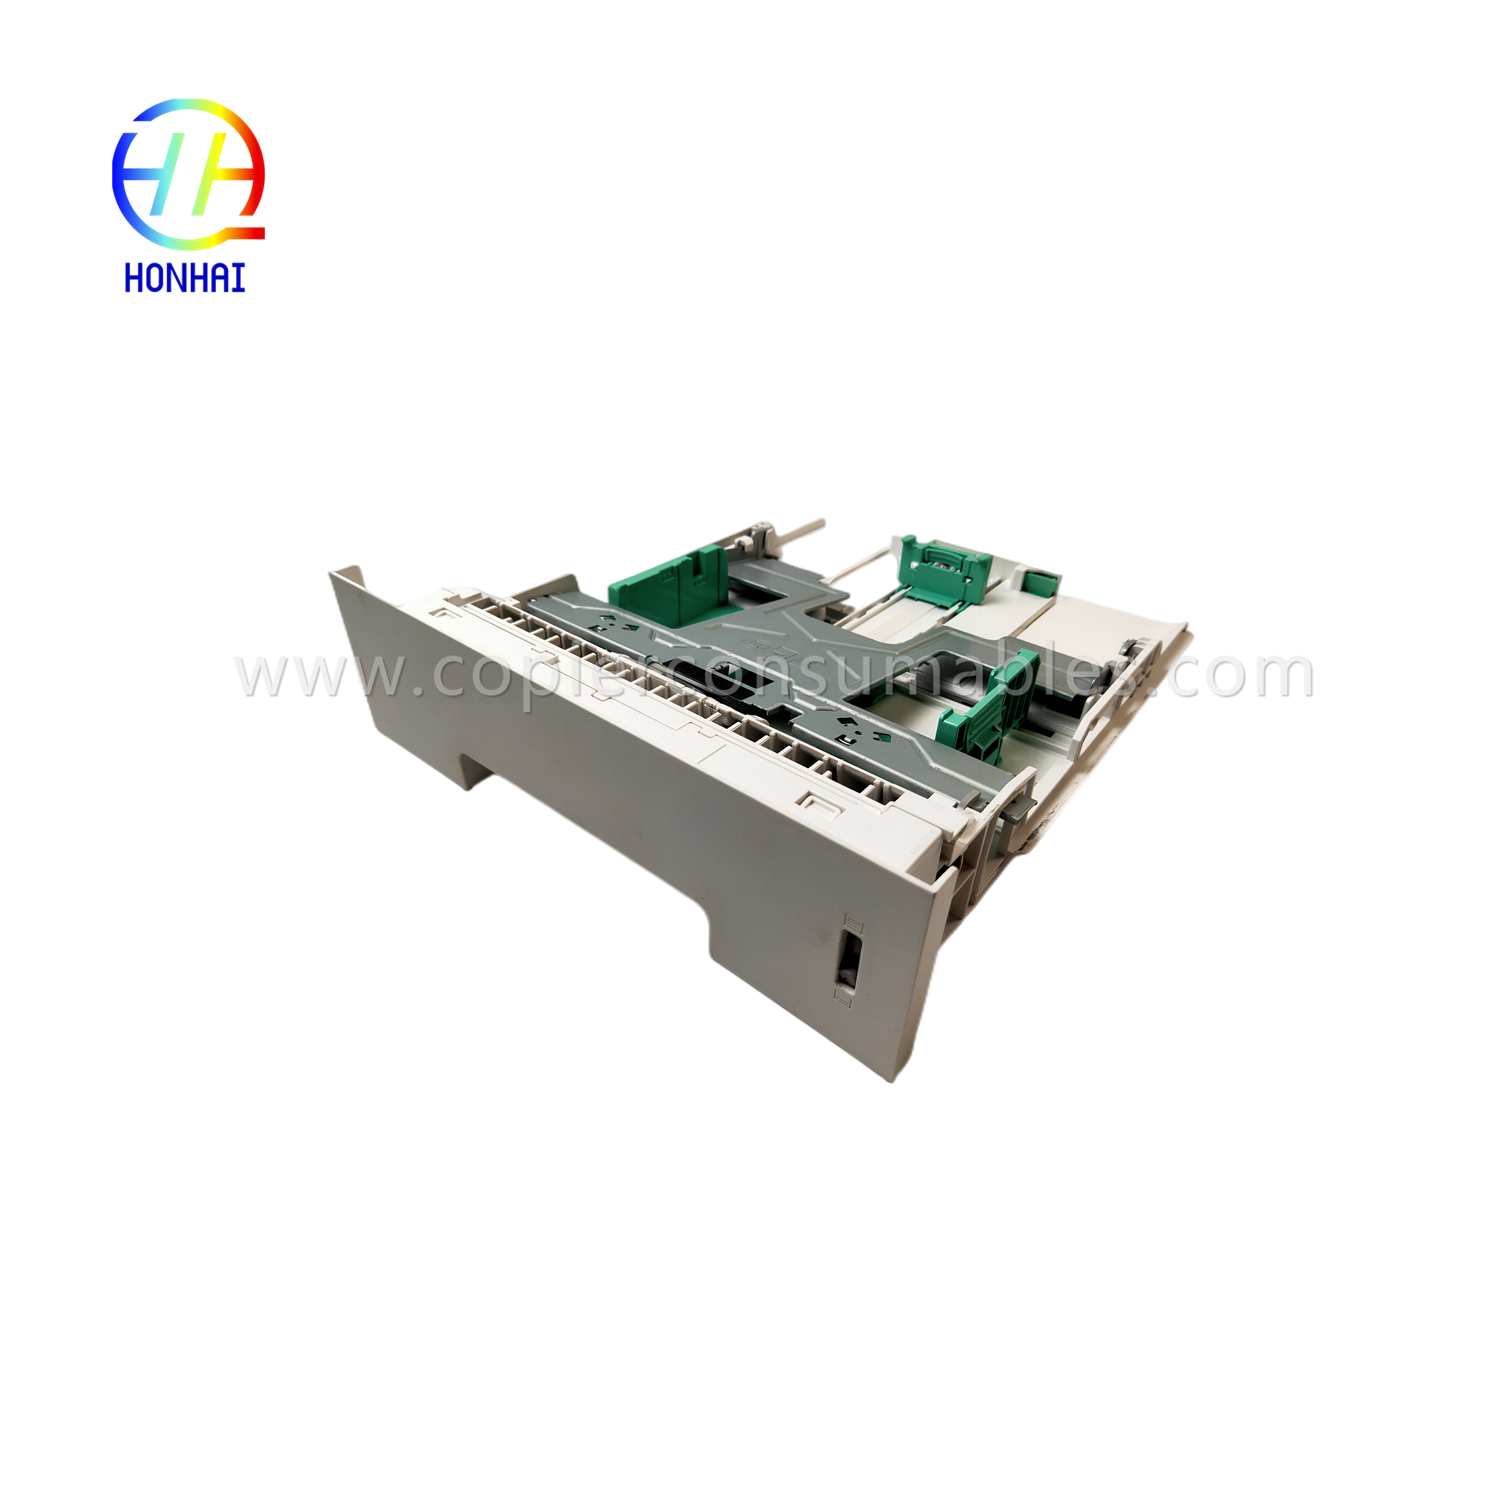 https://c585.goodao.net/apers-tray-assembly-for-xerox-phaser-3320dni-workcentre-3315dn-3325dni-050n00650-cassette-paper-tray-product/